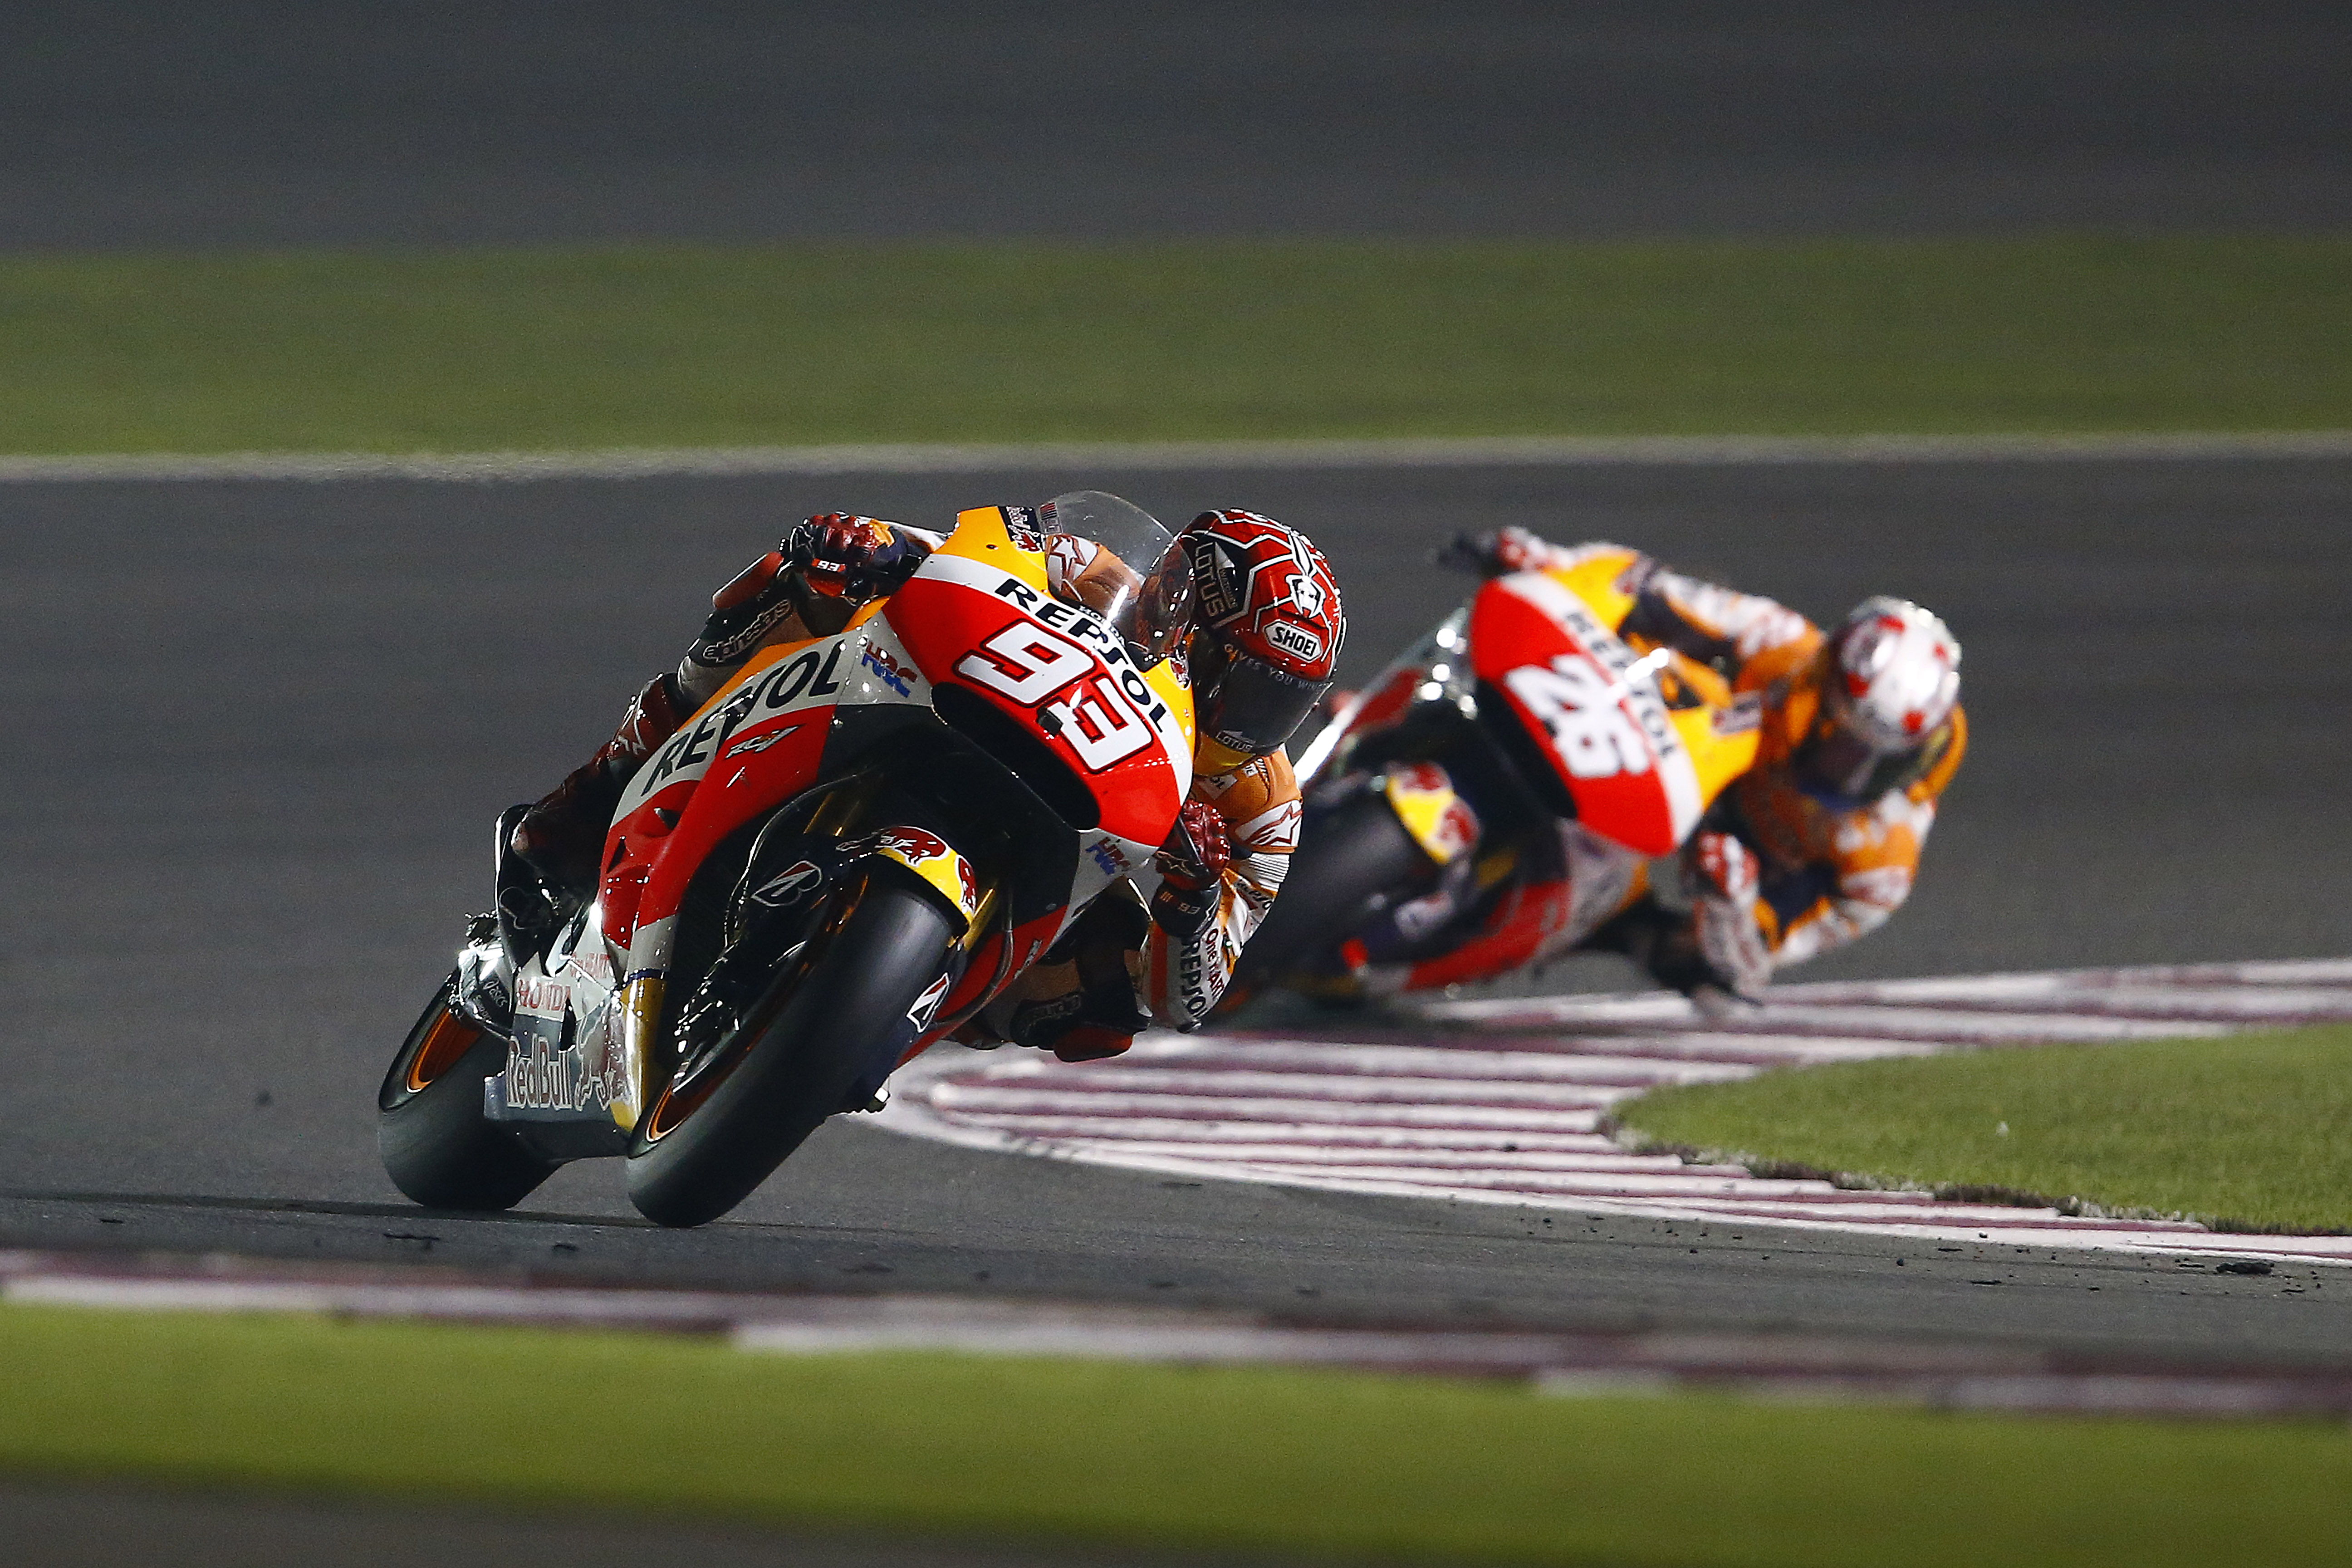 Marquez: ‘We salvaged 11 important points’